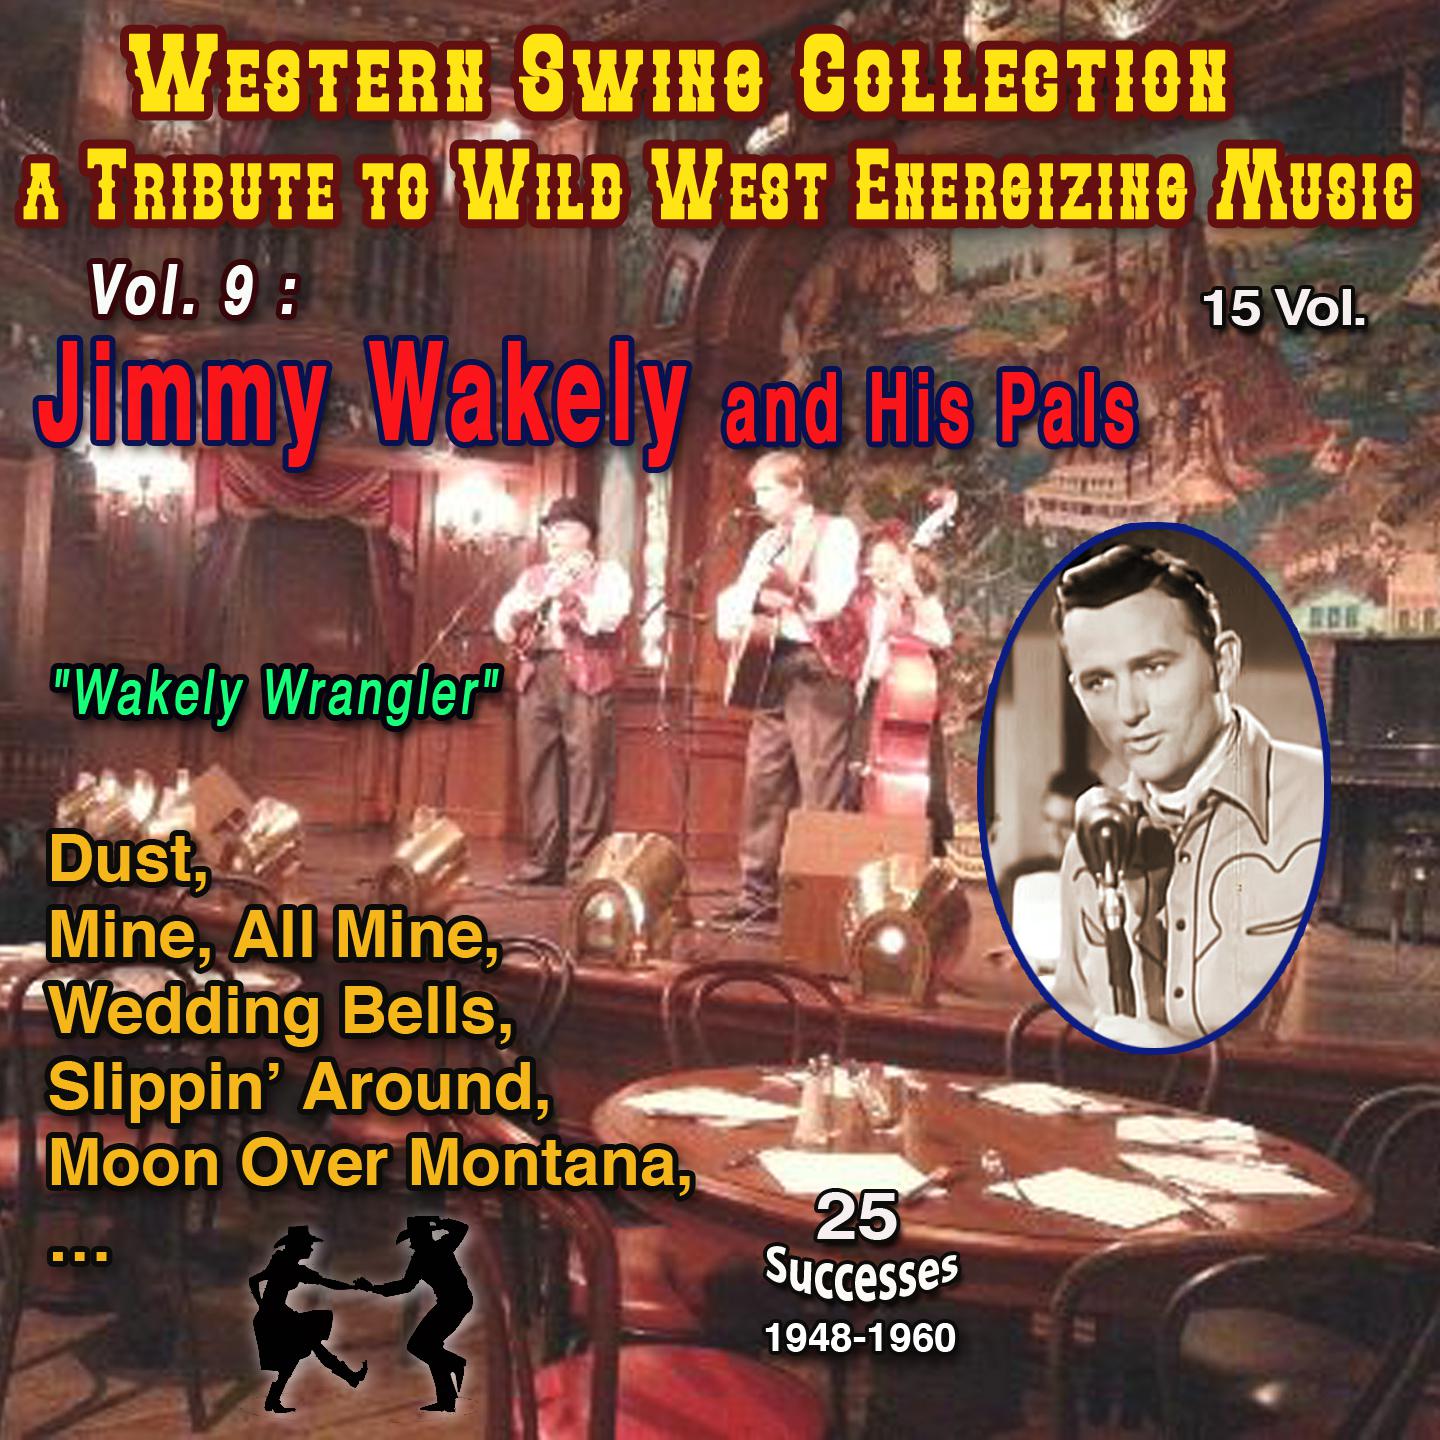 Постер альбома Western Swing Collection : a Tribute to Wild West Energizing Music : 15 Vol. Vol. 9 : Jimmy Wakely and His Saddle Pals "One of the last singing cowboy"